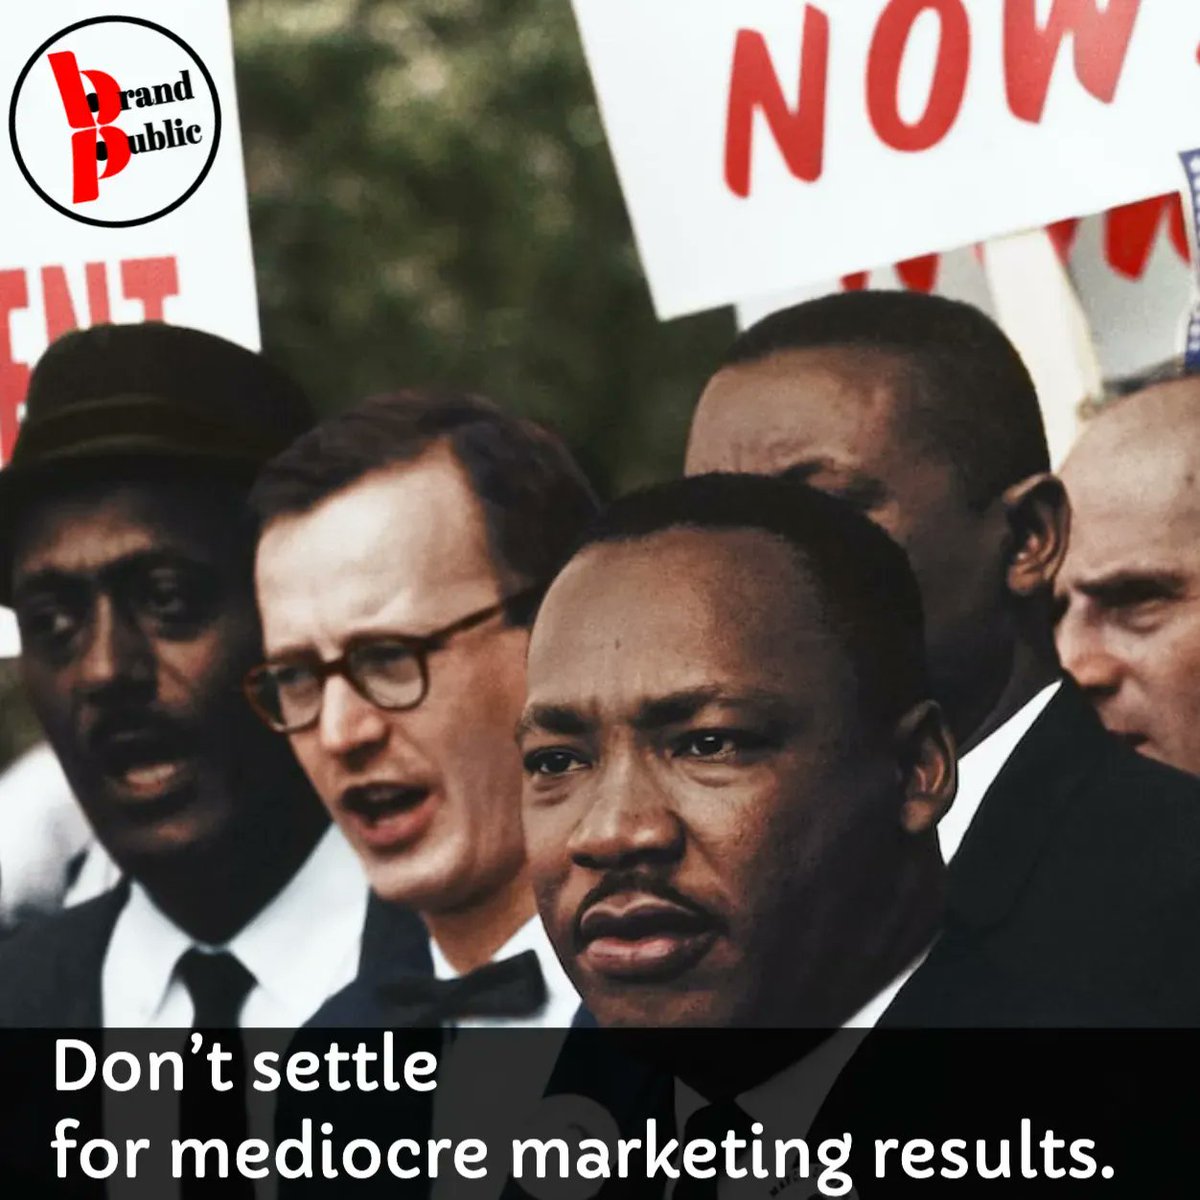 We think differently.

We challenge the status quo.

We deliver growth.

See for yourself - buff.ly/3C3aw1O
-
-
#seomarketing #seoinguk #seoexpert #seo #brandpublic #digitalmarketing #martinlutherking  #challenging #challengingthestatusquo